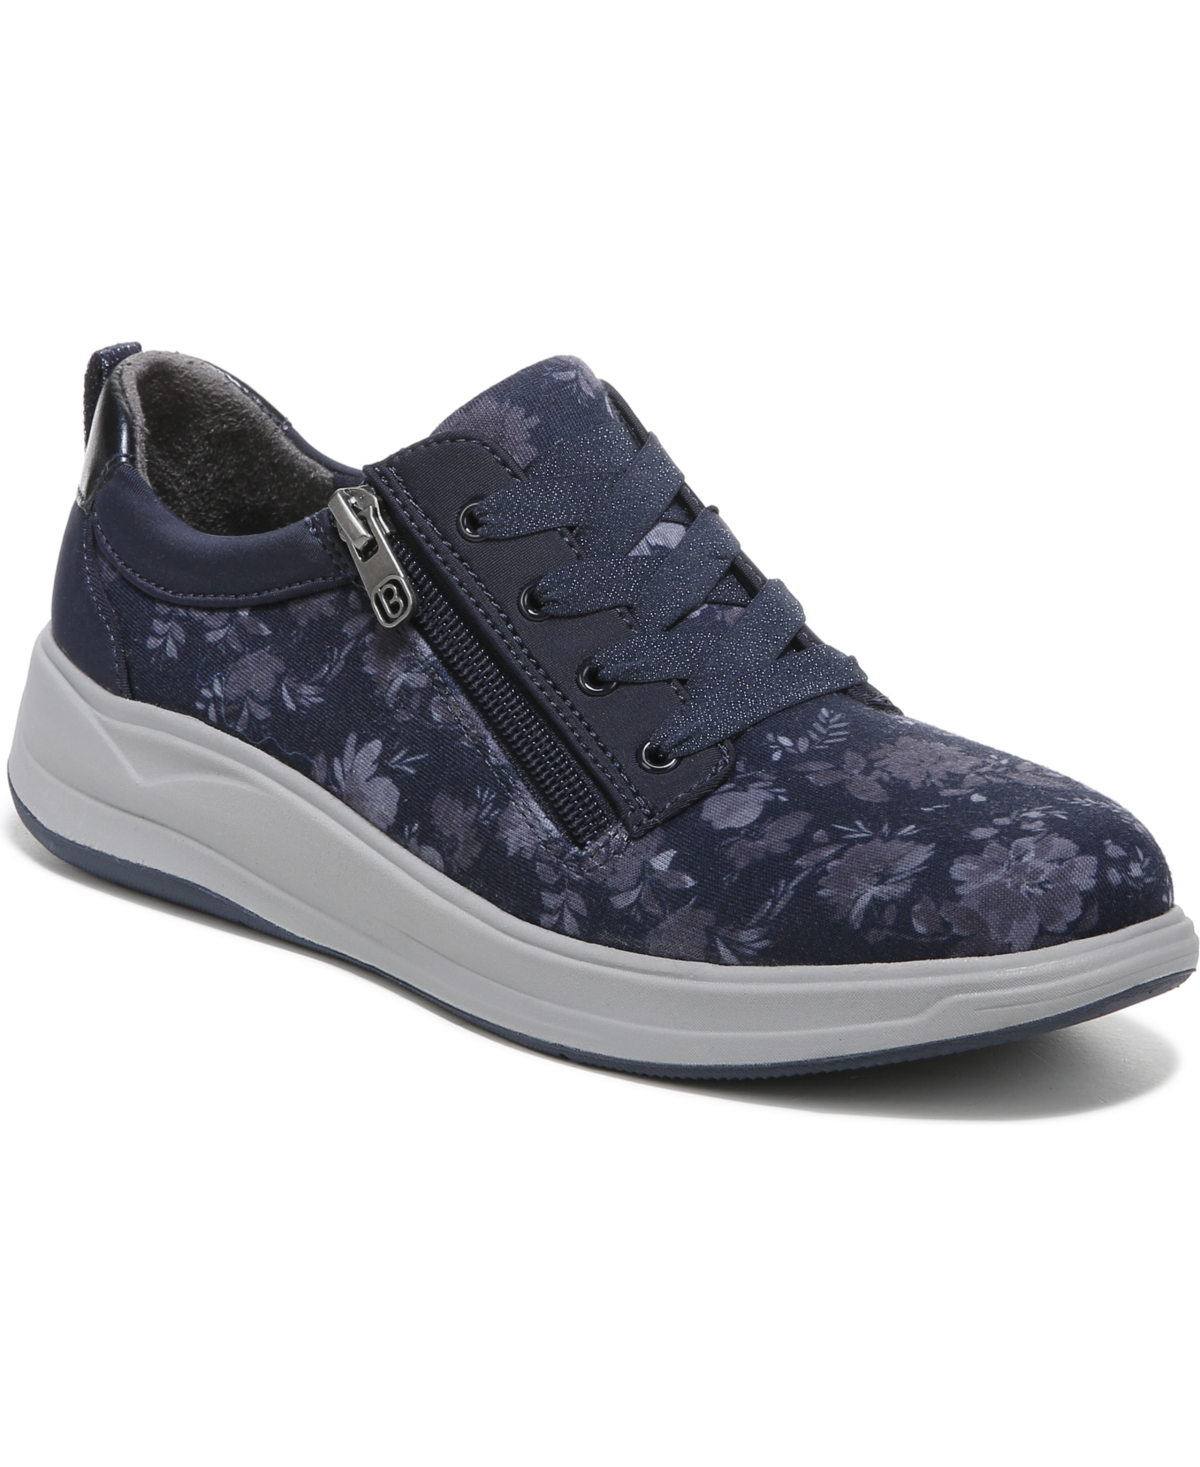 BZees Tag Along Washable Sneakers Women's Shoes